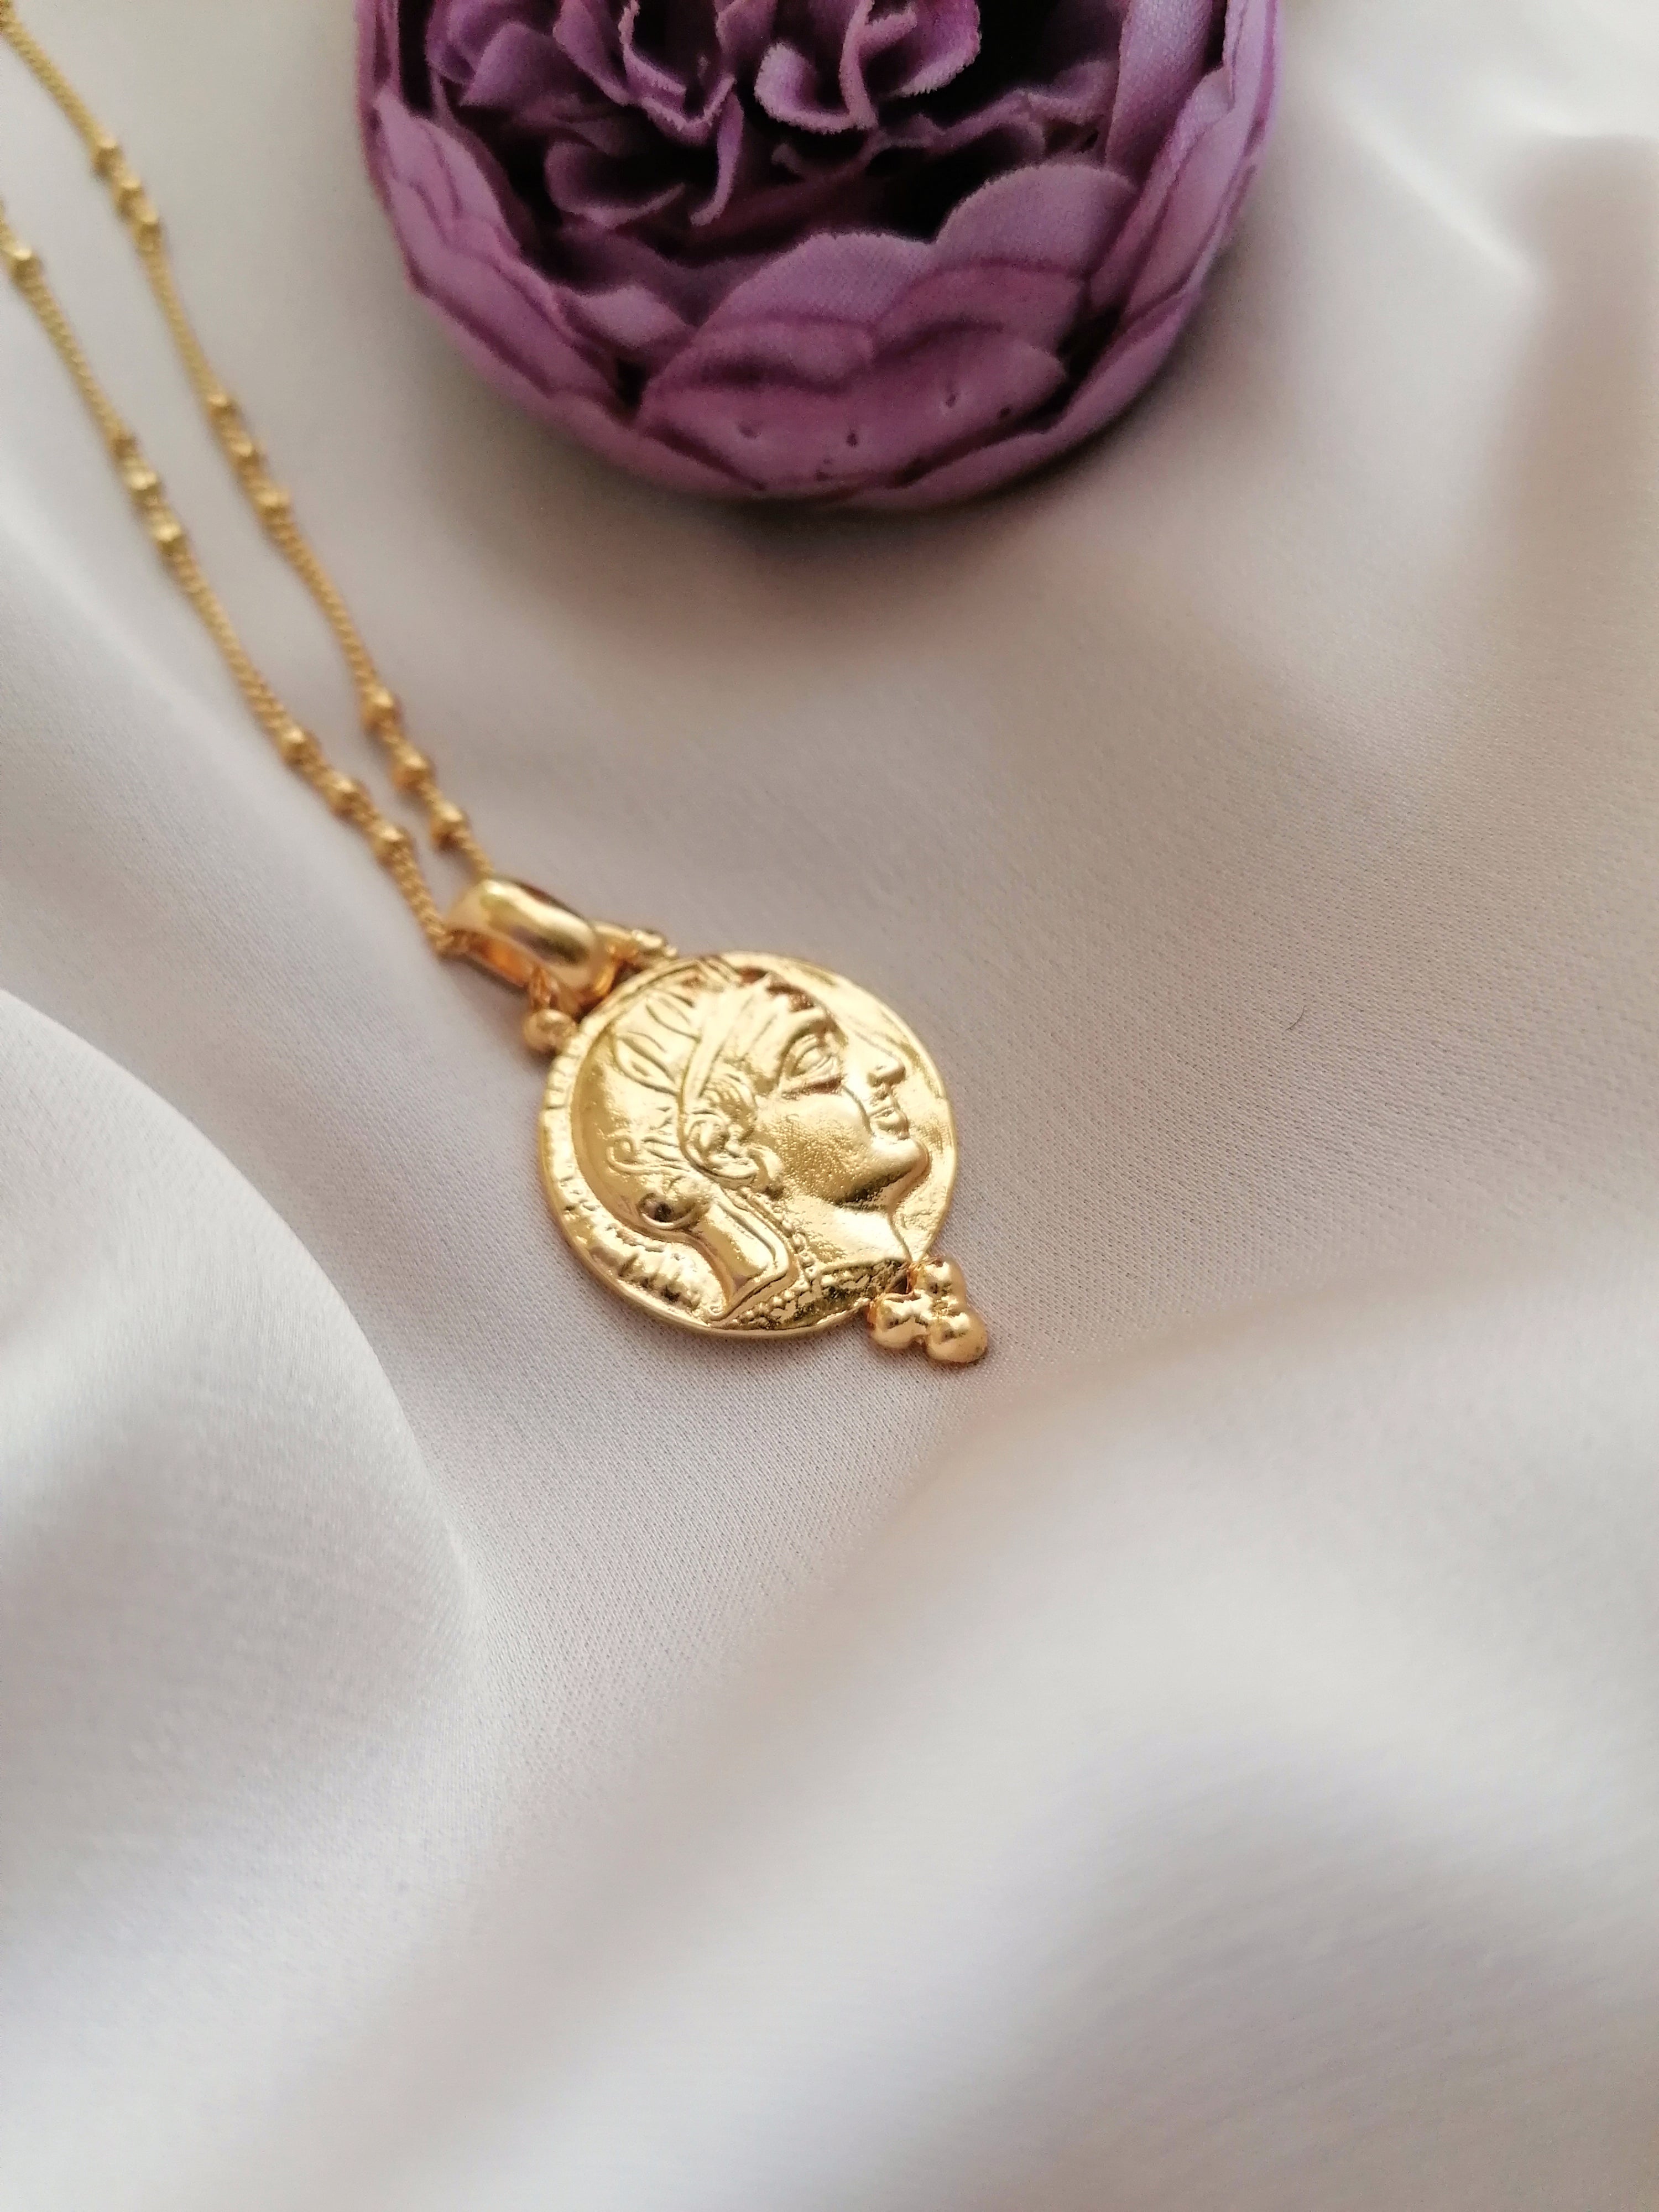 Buy Alexander the Great Coin Pendant Necklace, Ancient Greek Coin Jewelry,  Goddess Athena Coin, Kingdom of Thrace Lysimachos King Unisex Men Online in  India - Etsy